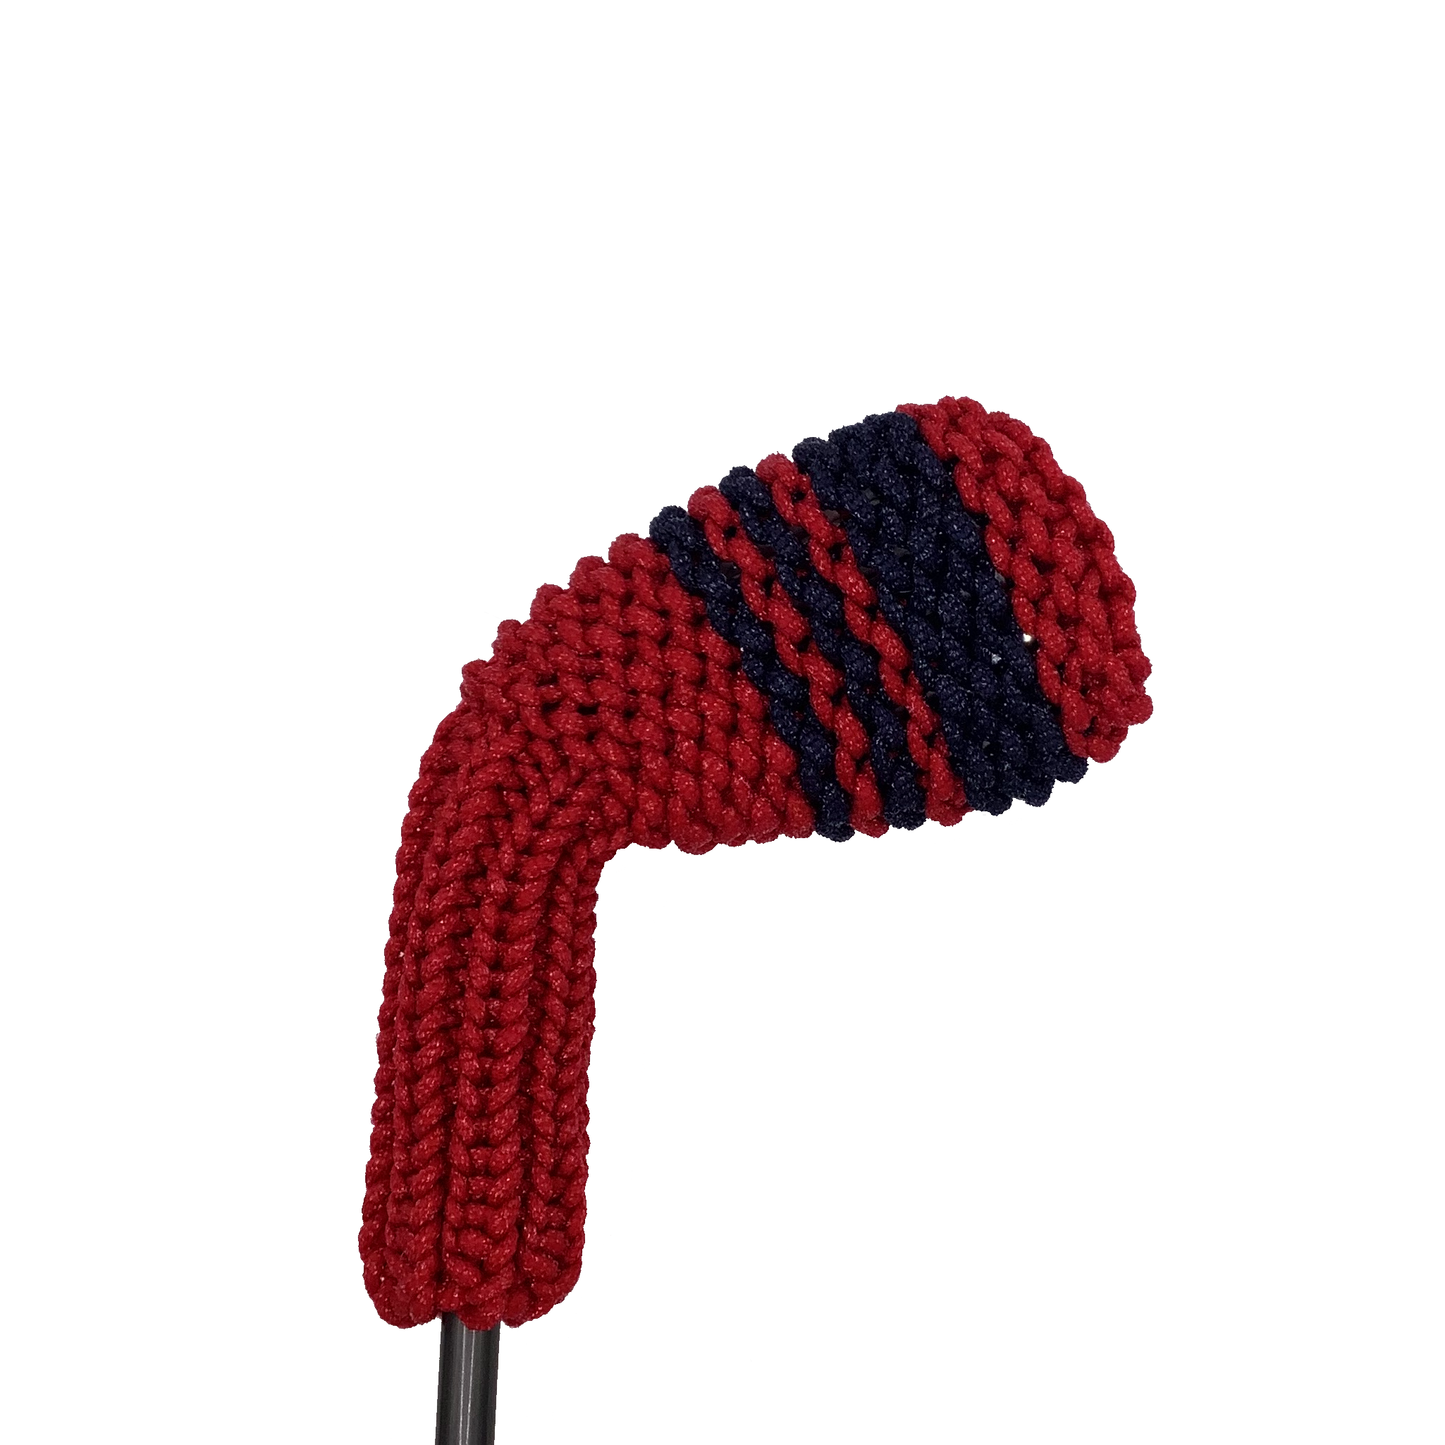 Clean Shot™ iron golf club headcover in red with navy blue stripes to represent a 7 iron.